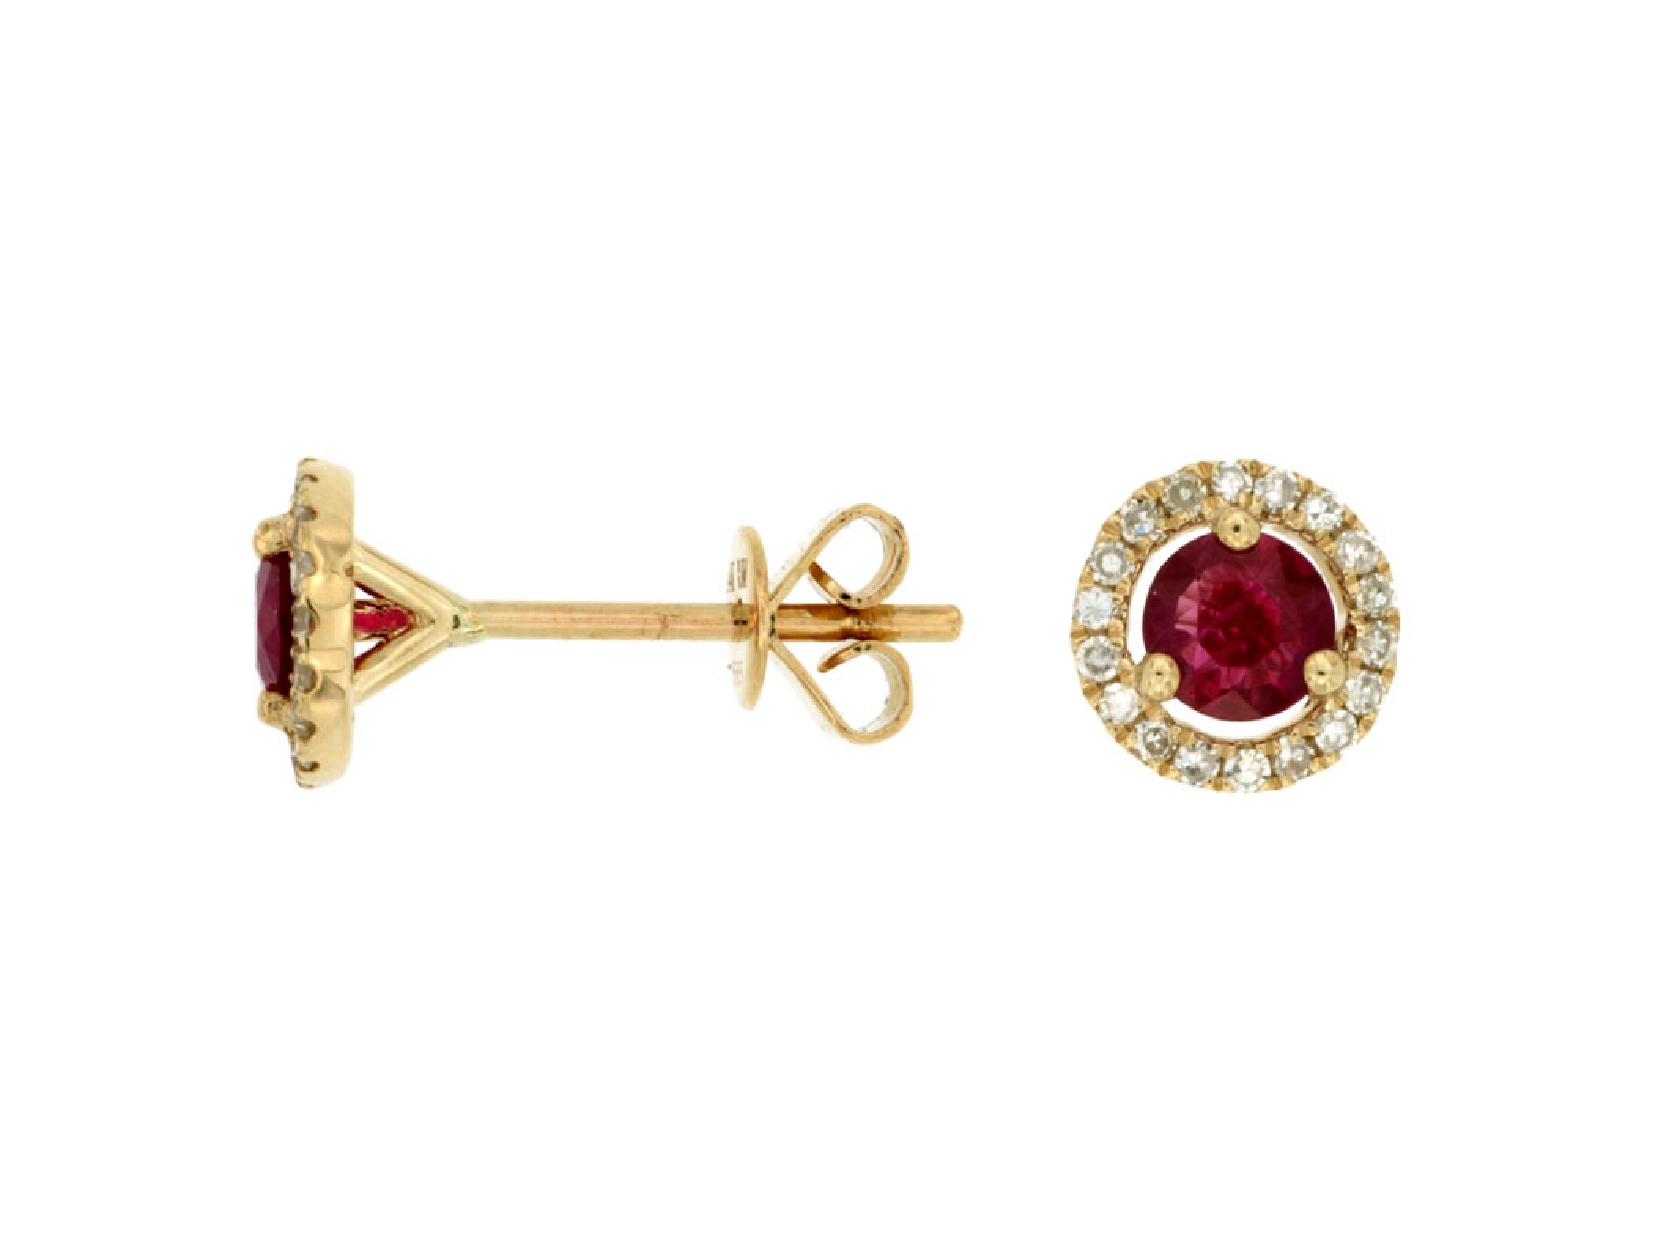 14K Yellow Gold Ruby Studs with Diamond Halo
Rubies weigh 0.80CTTW
Diamonds weigh 0.15CTTW